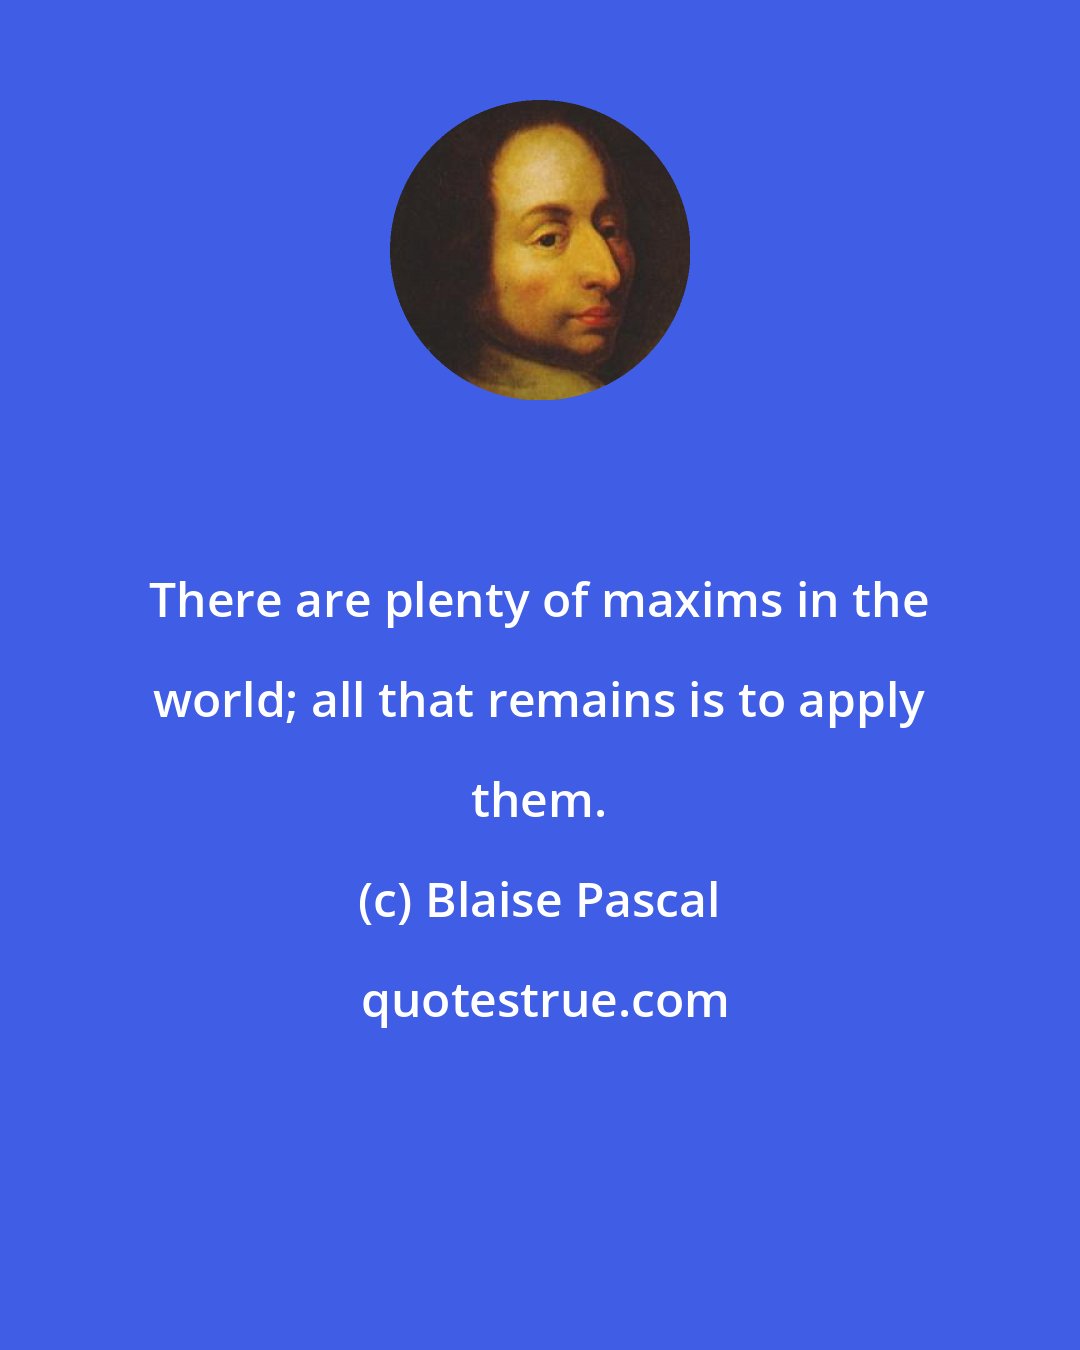 Blaise Pascal: There are plenty of maxims in the world; all that remains is to apply them.